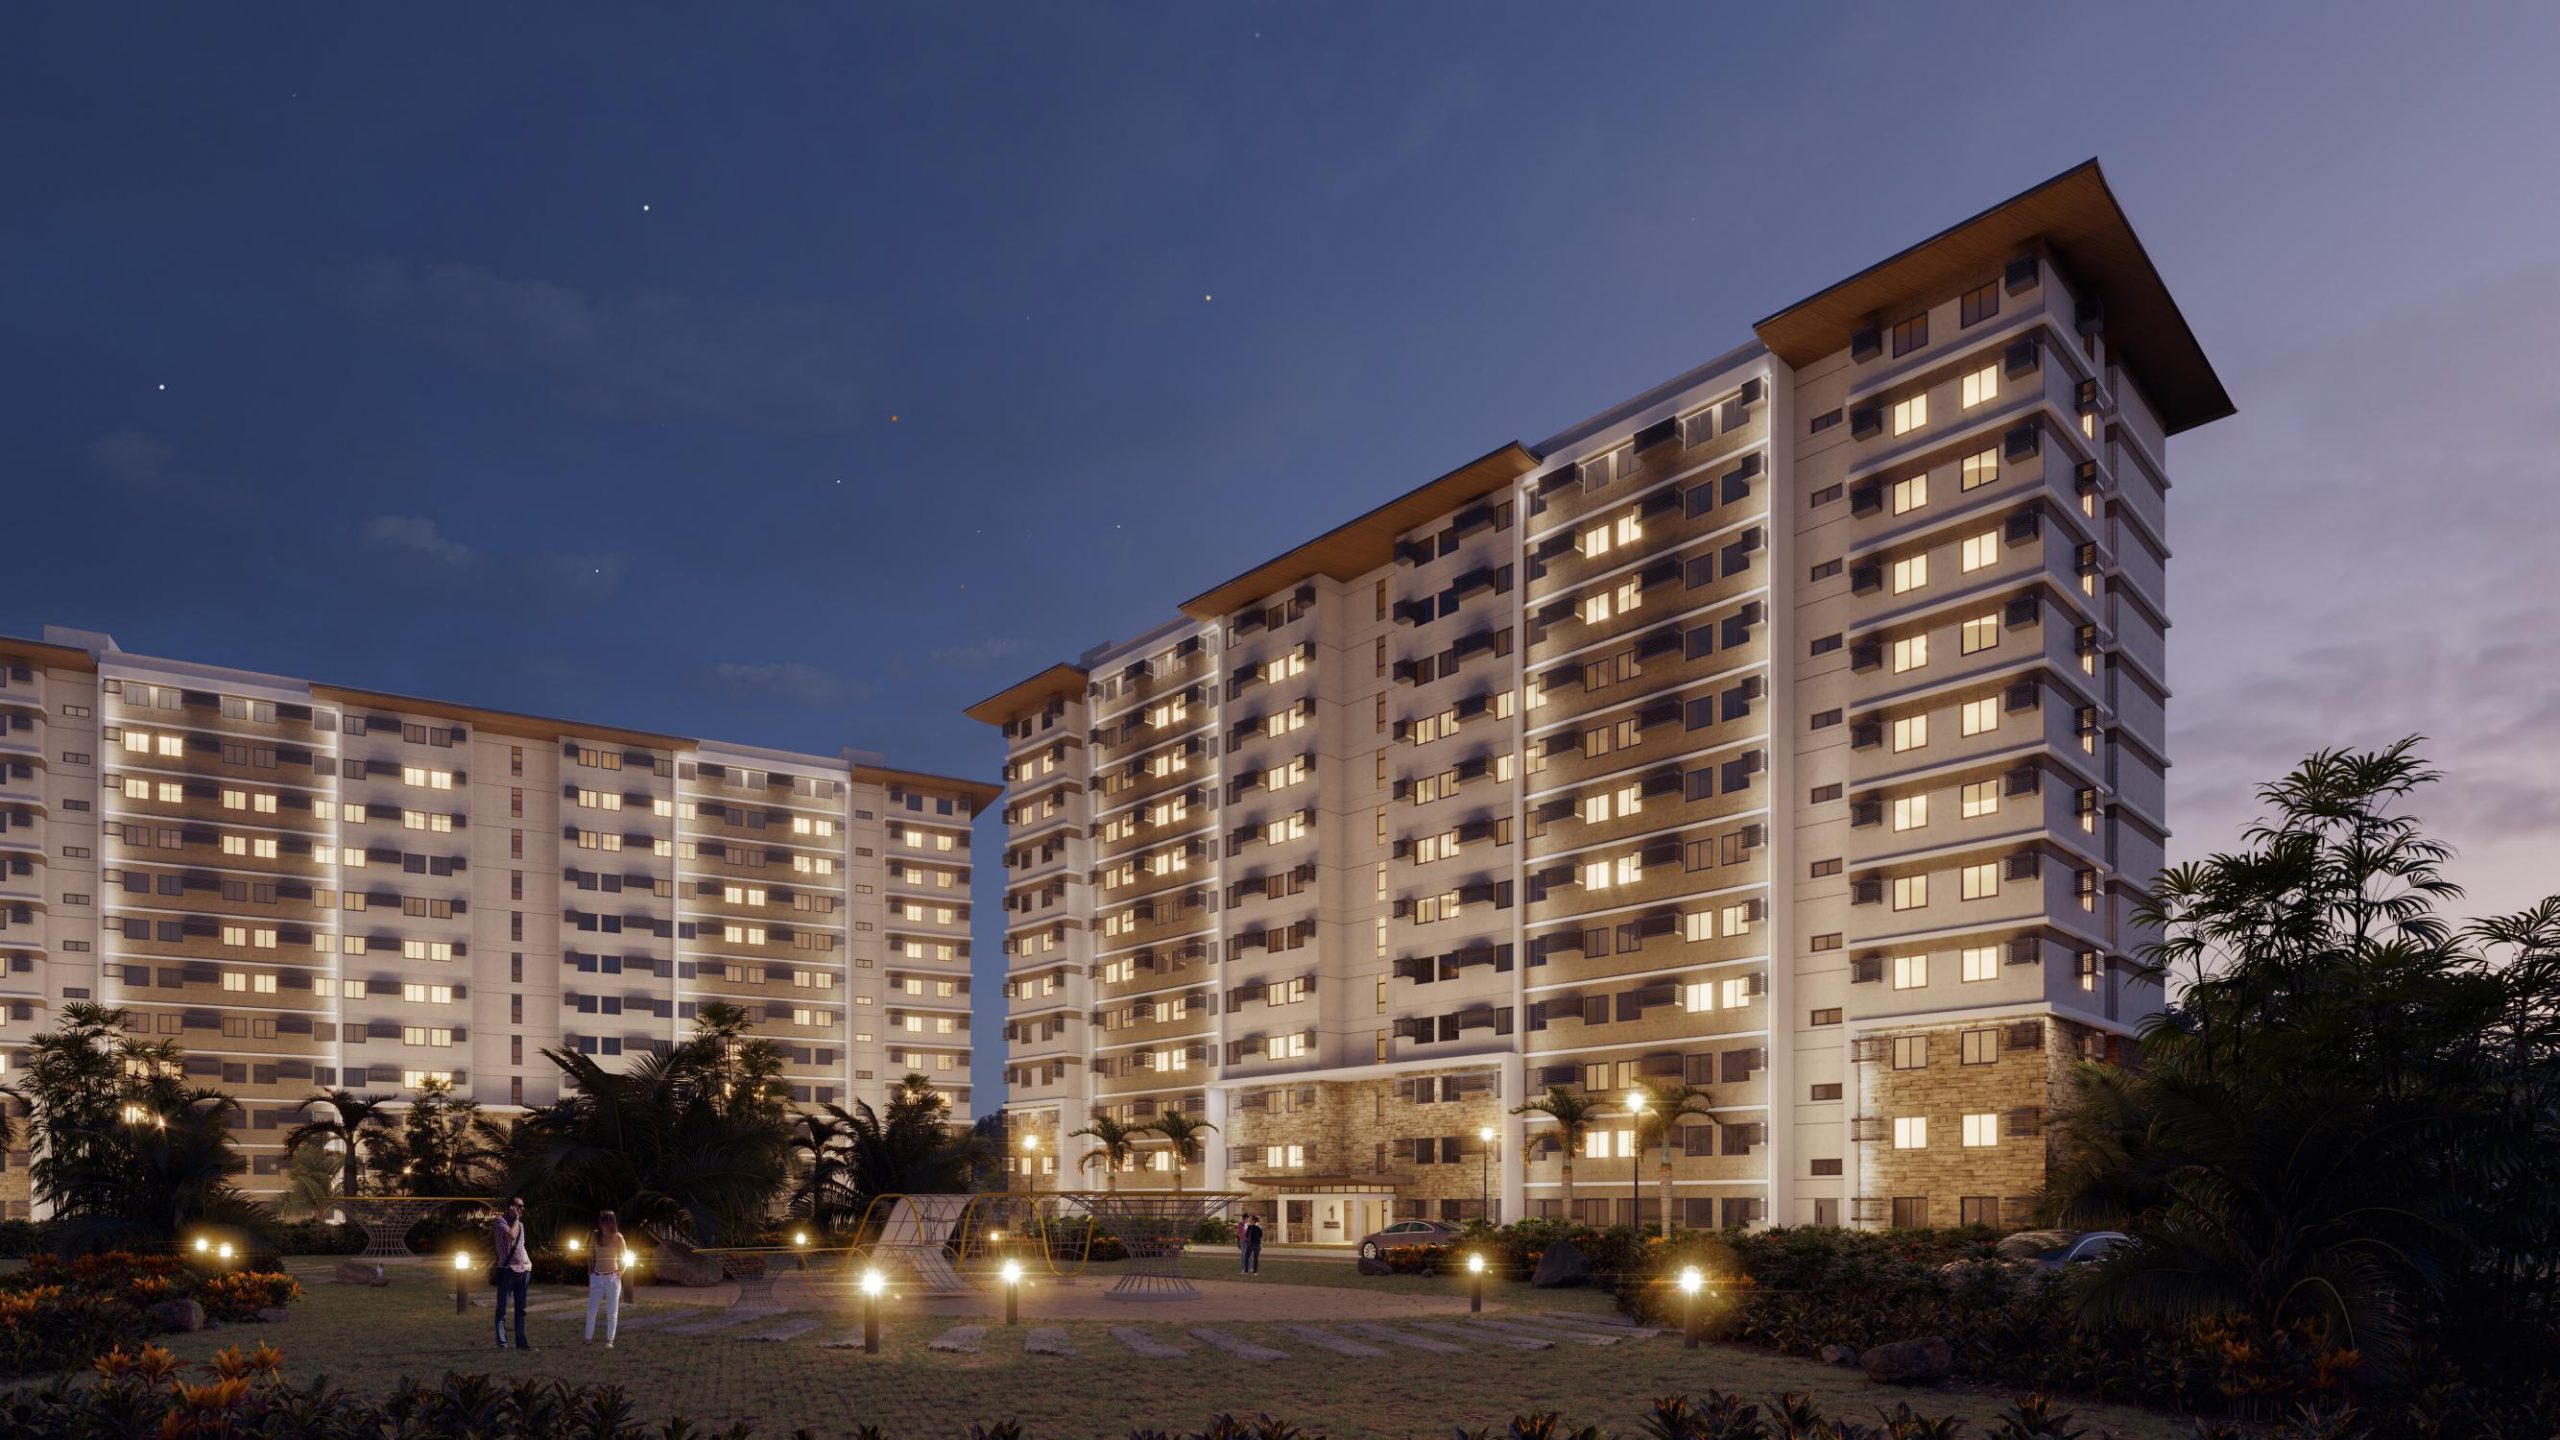 Rental Price Guide on Condominiums in The Philippines